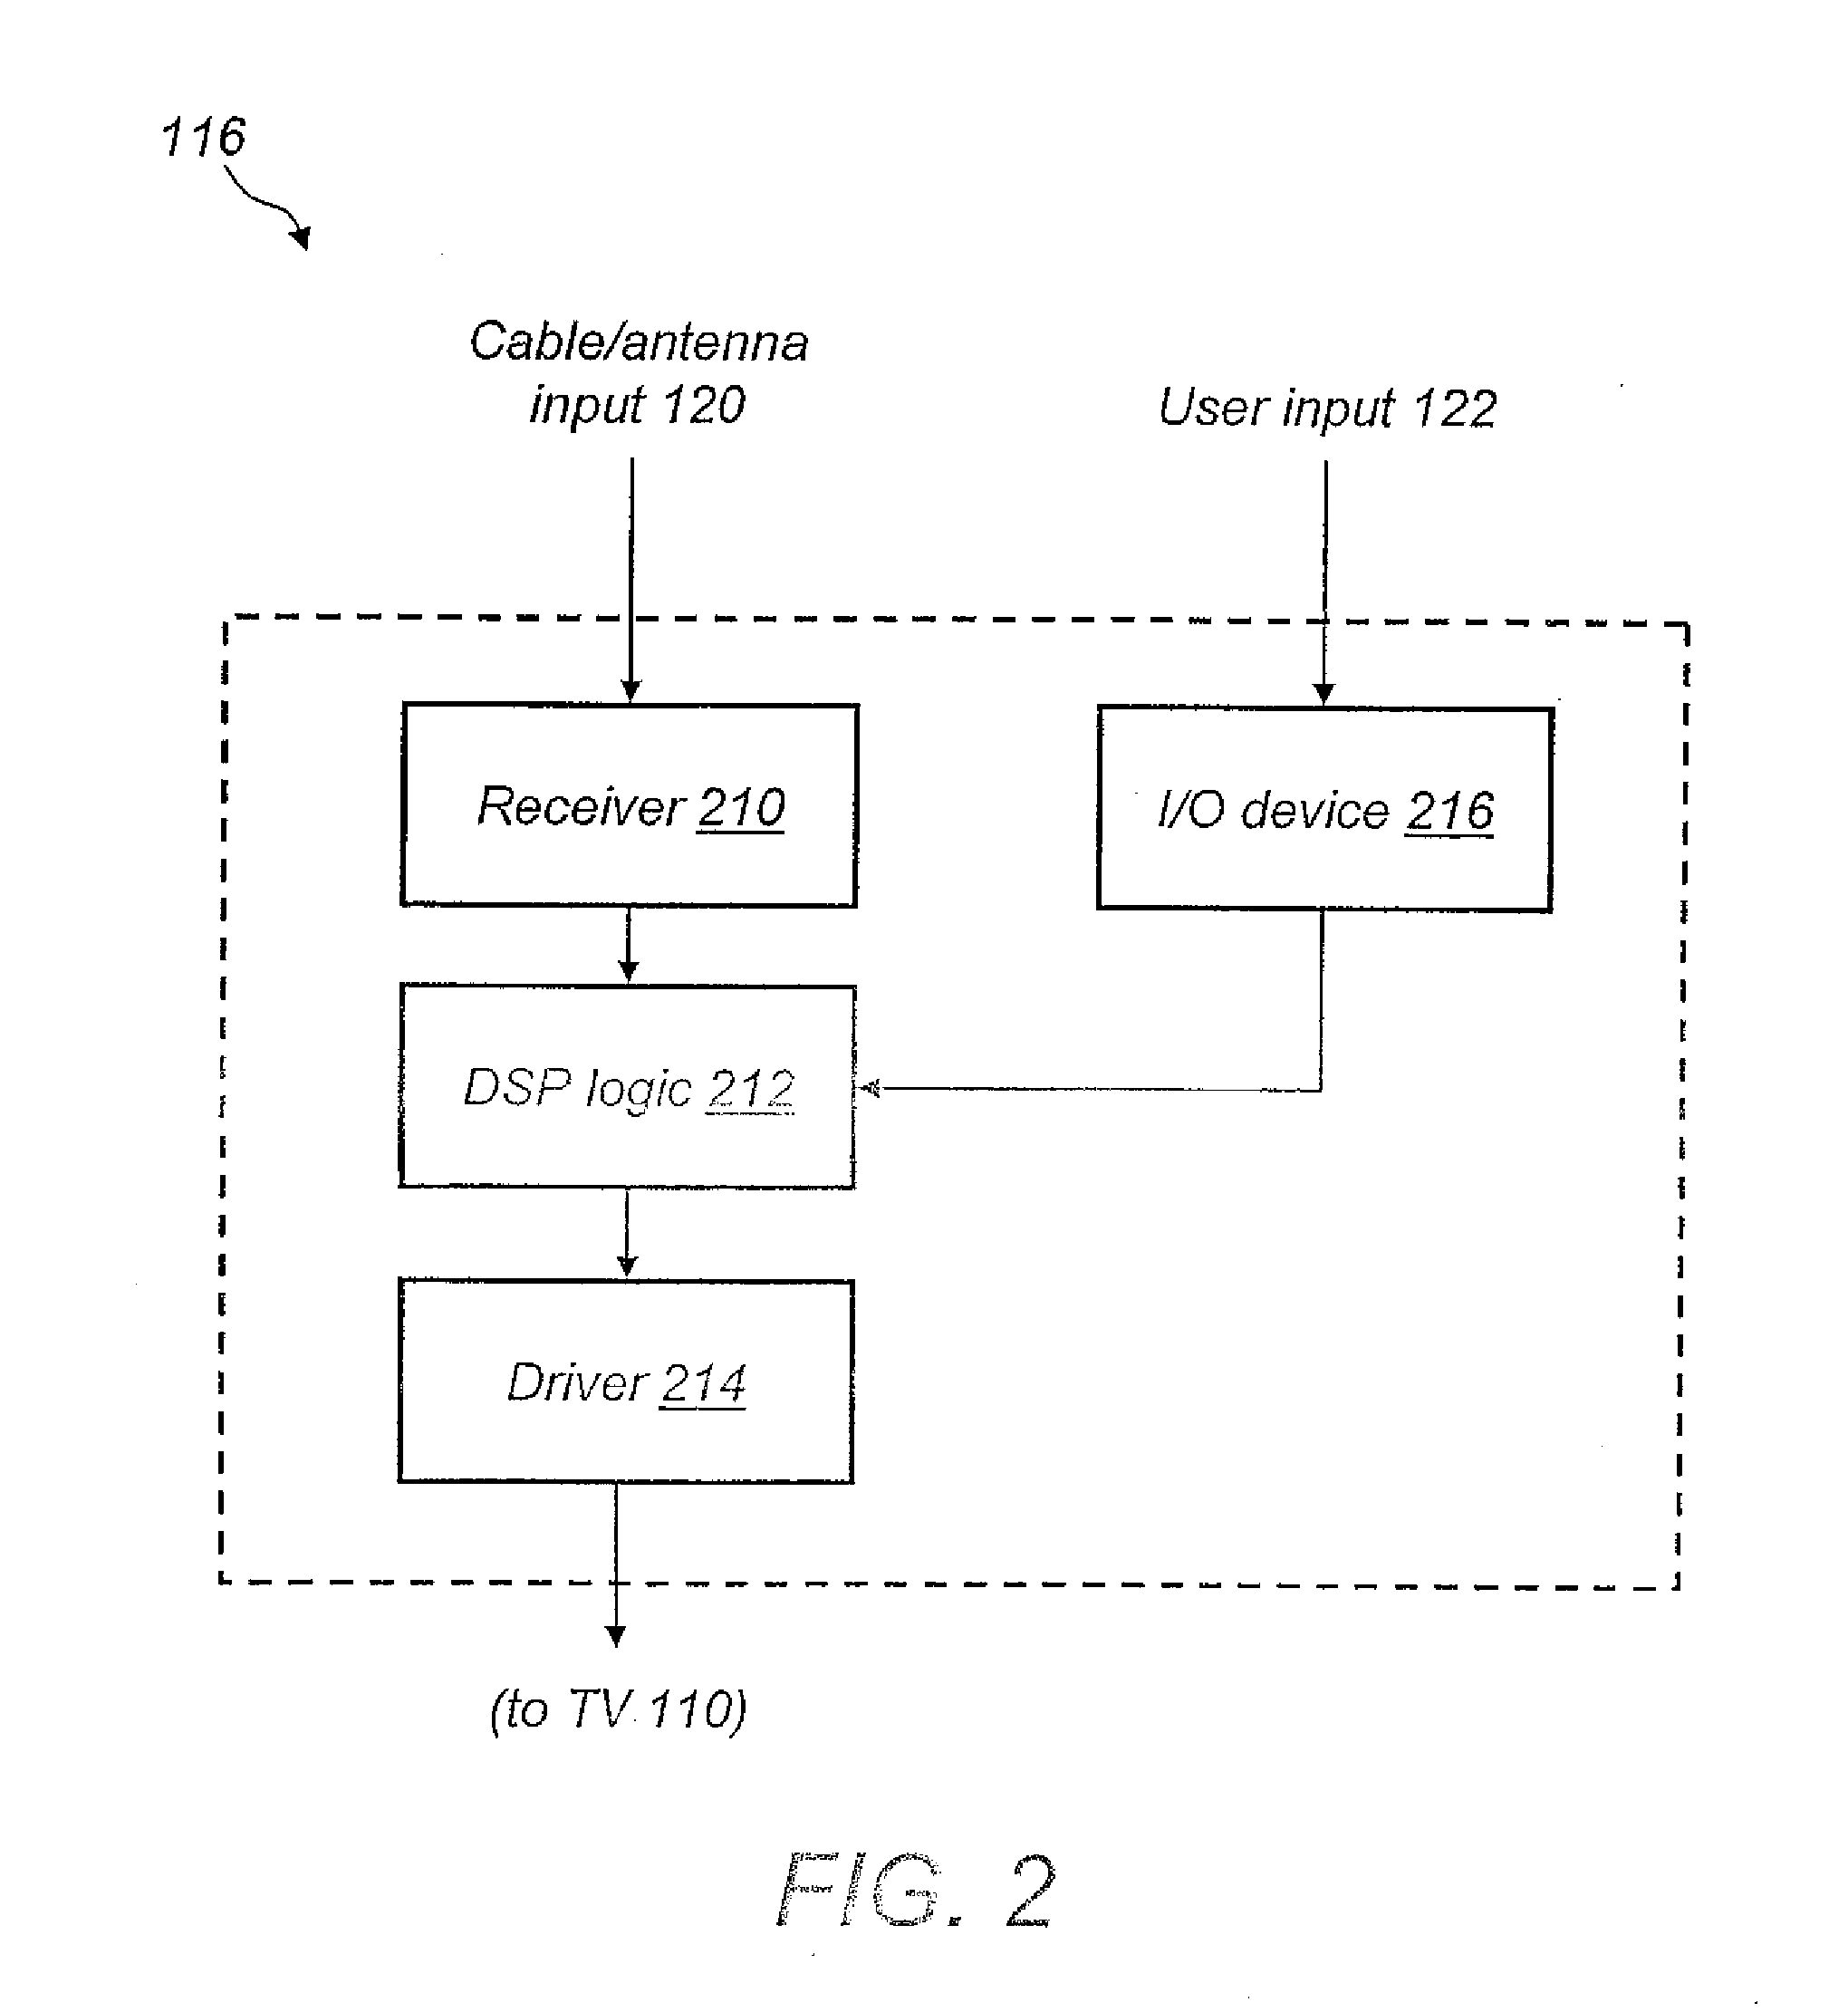 System for and Method of Providing Improved Intelligibility of Television Audio for the Hearing Impaired